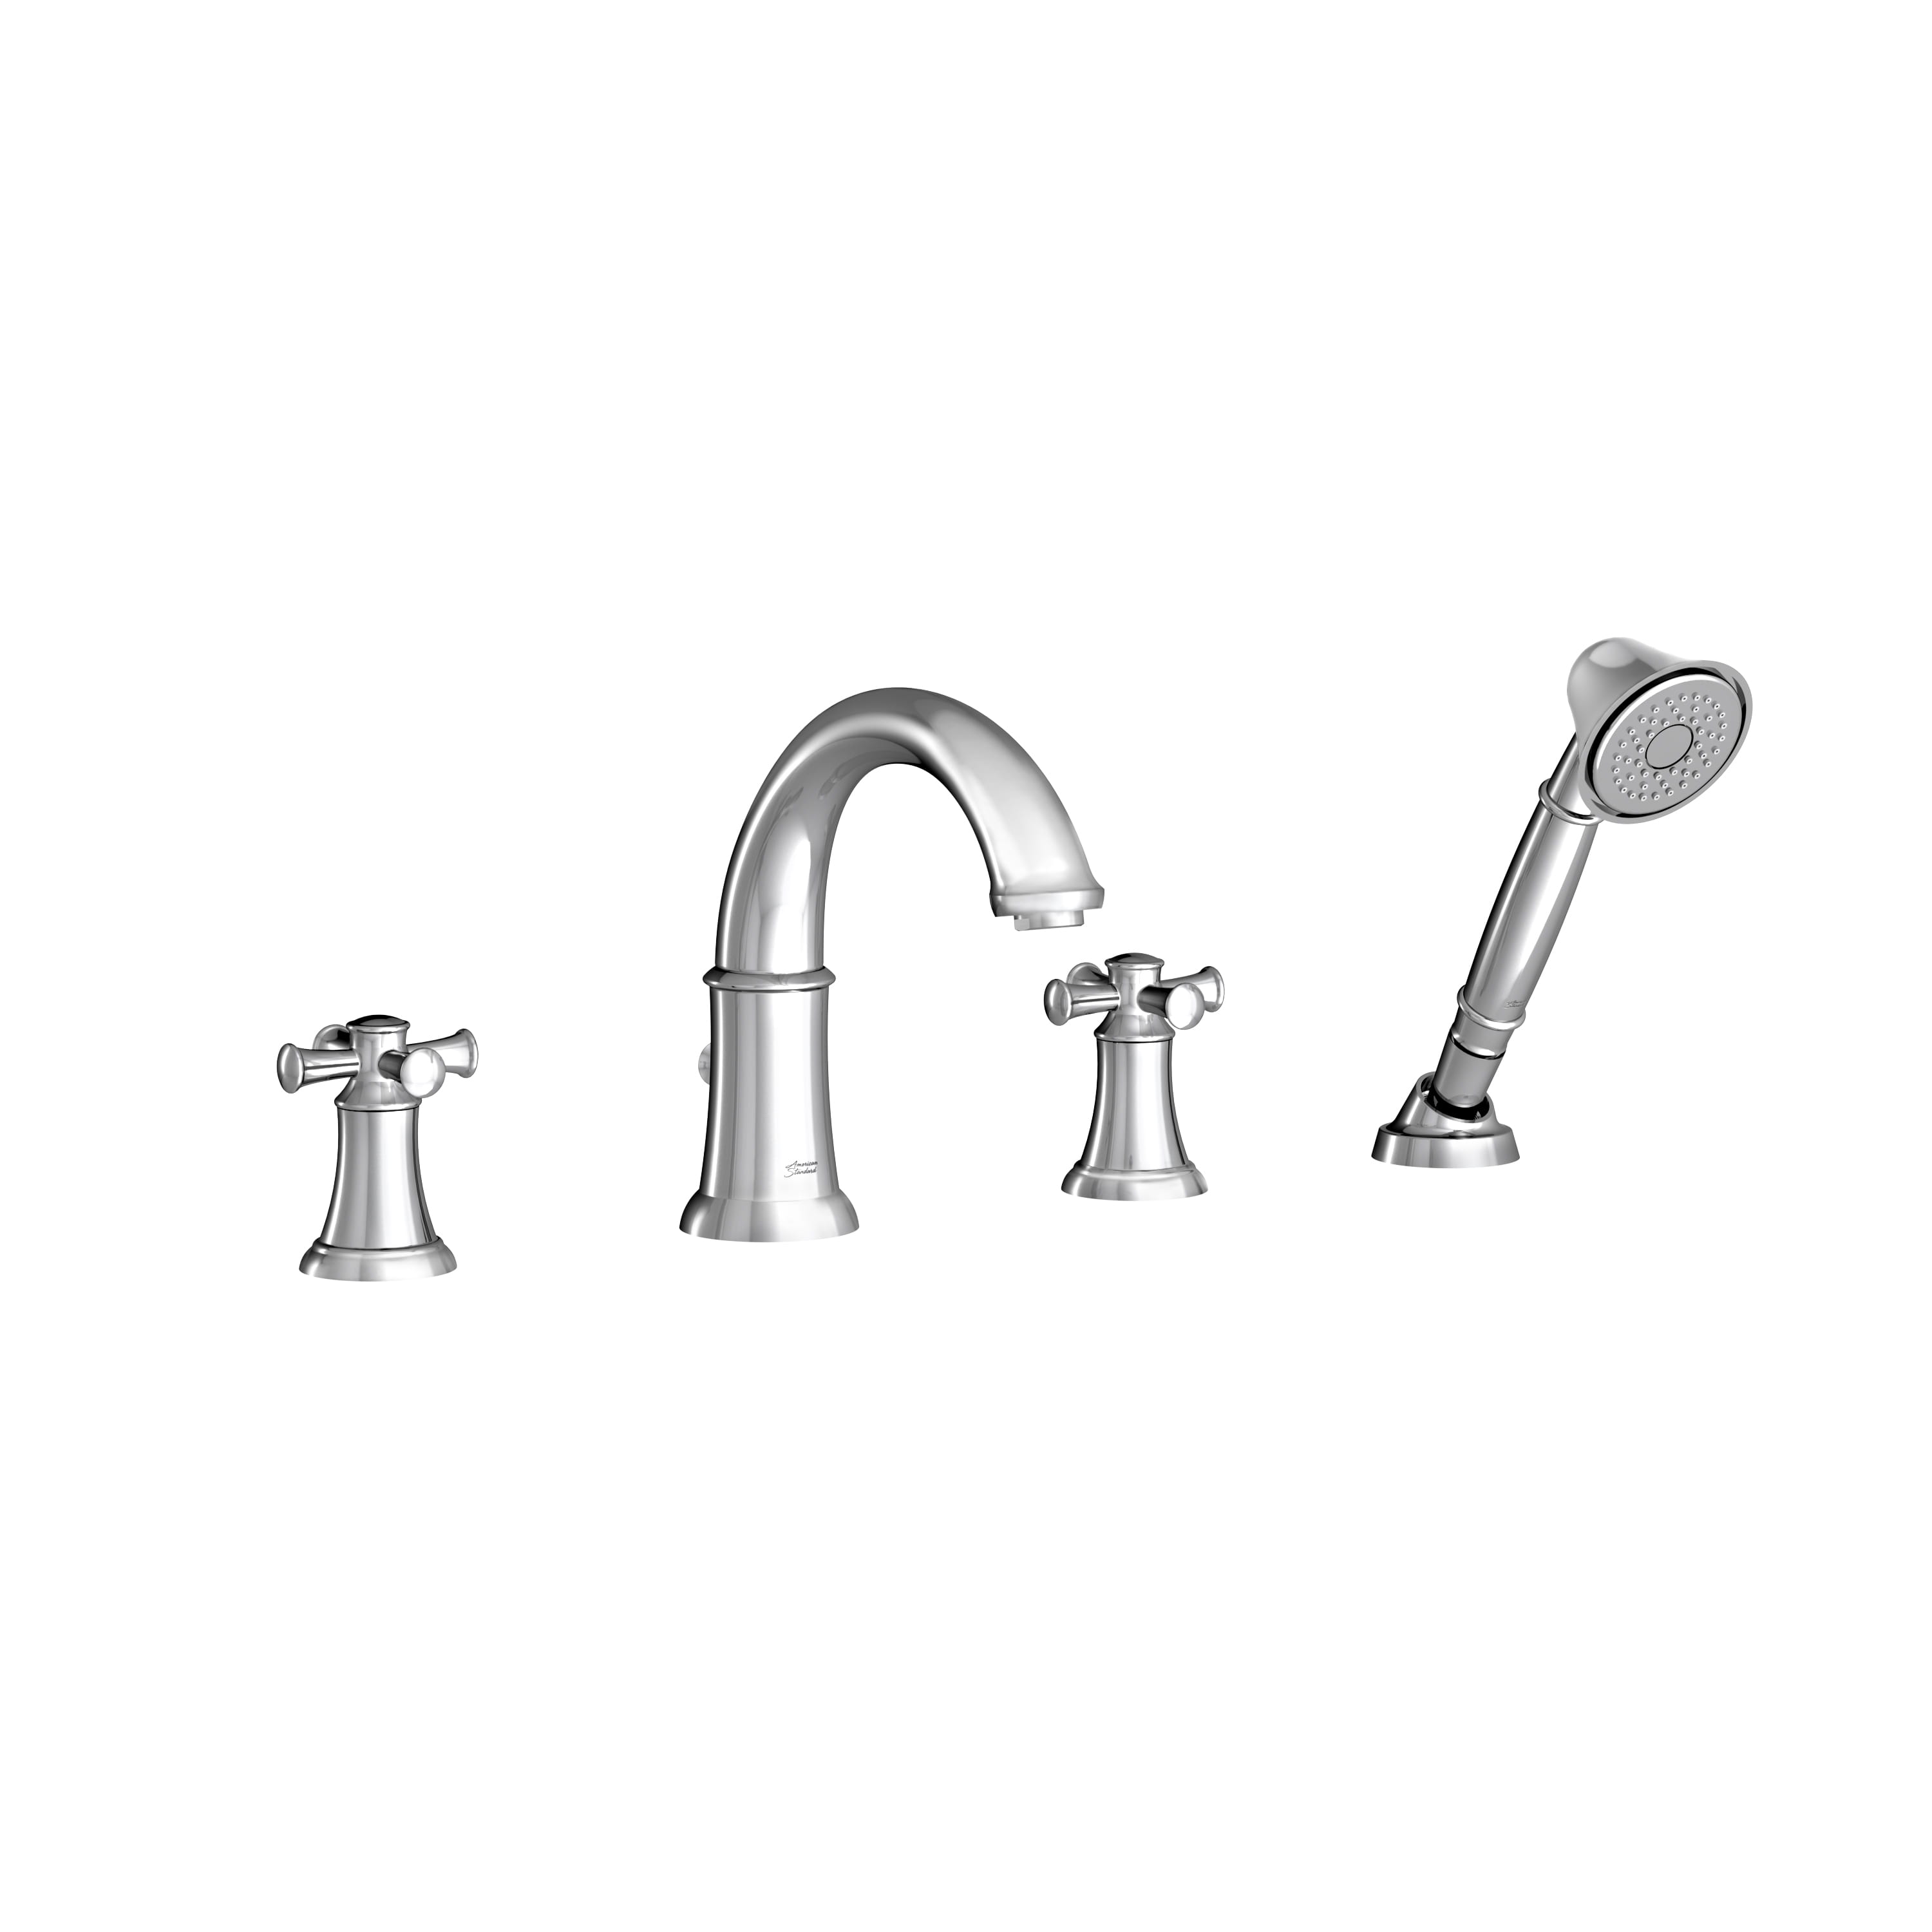 Portsmouth Bathtub Faucet with Personal Shower for Flash Rough-in Valve with Cross Handles